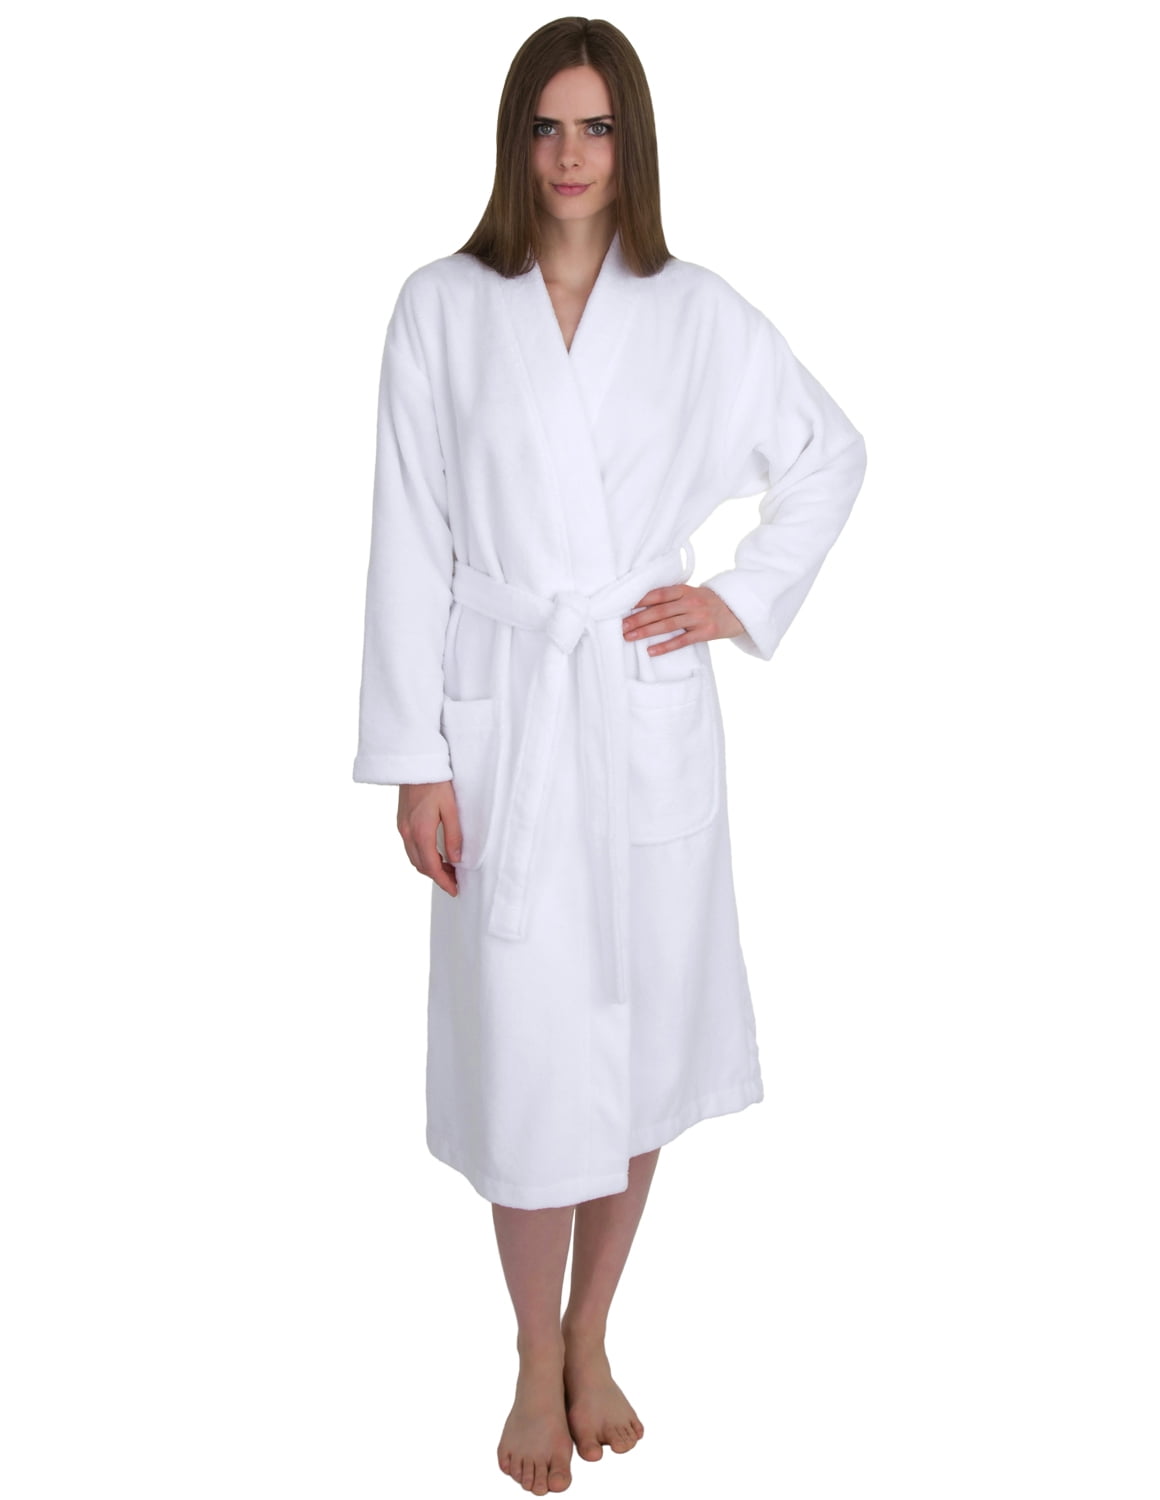 TowelSelections - TowelSelections Women's Robe, Fleece Cotton Terry ...